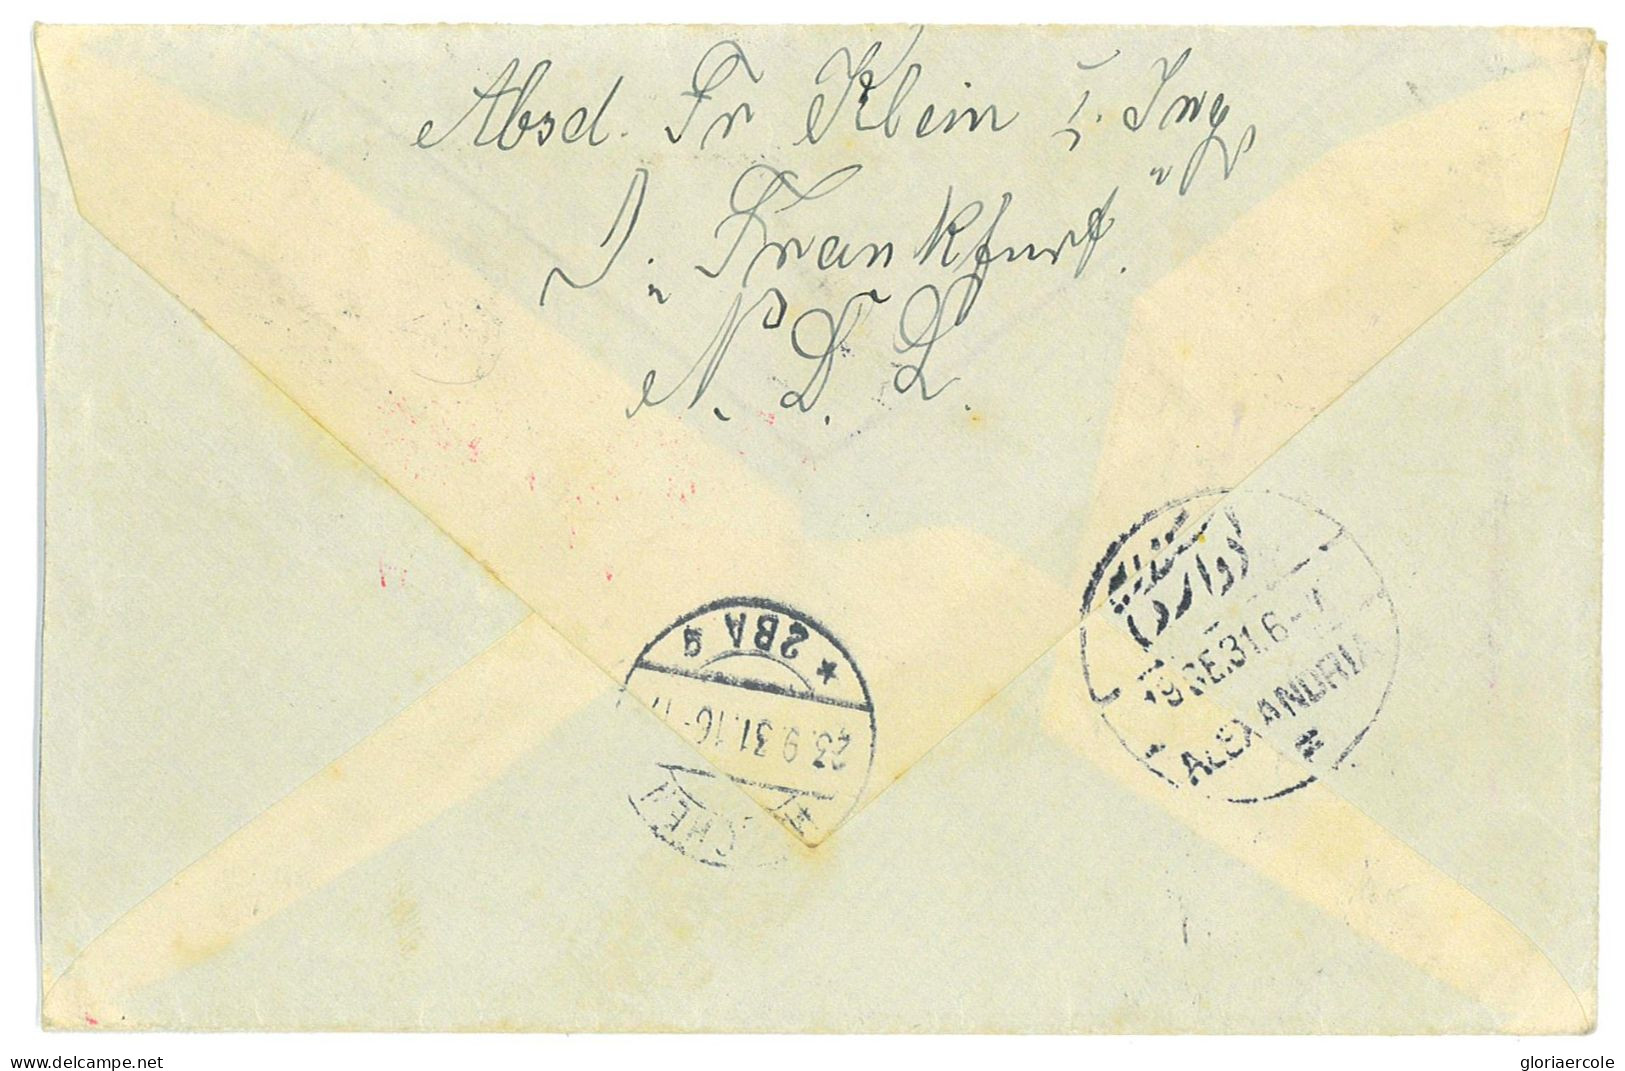 P2839 - EGYPT TO GERMANY 1931 USING A AIR MAIL EGYPT STAMP, FROM PORT SAID TO MÜNCHEN - Covers & Documents